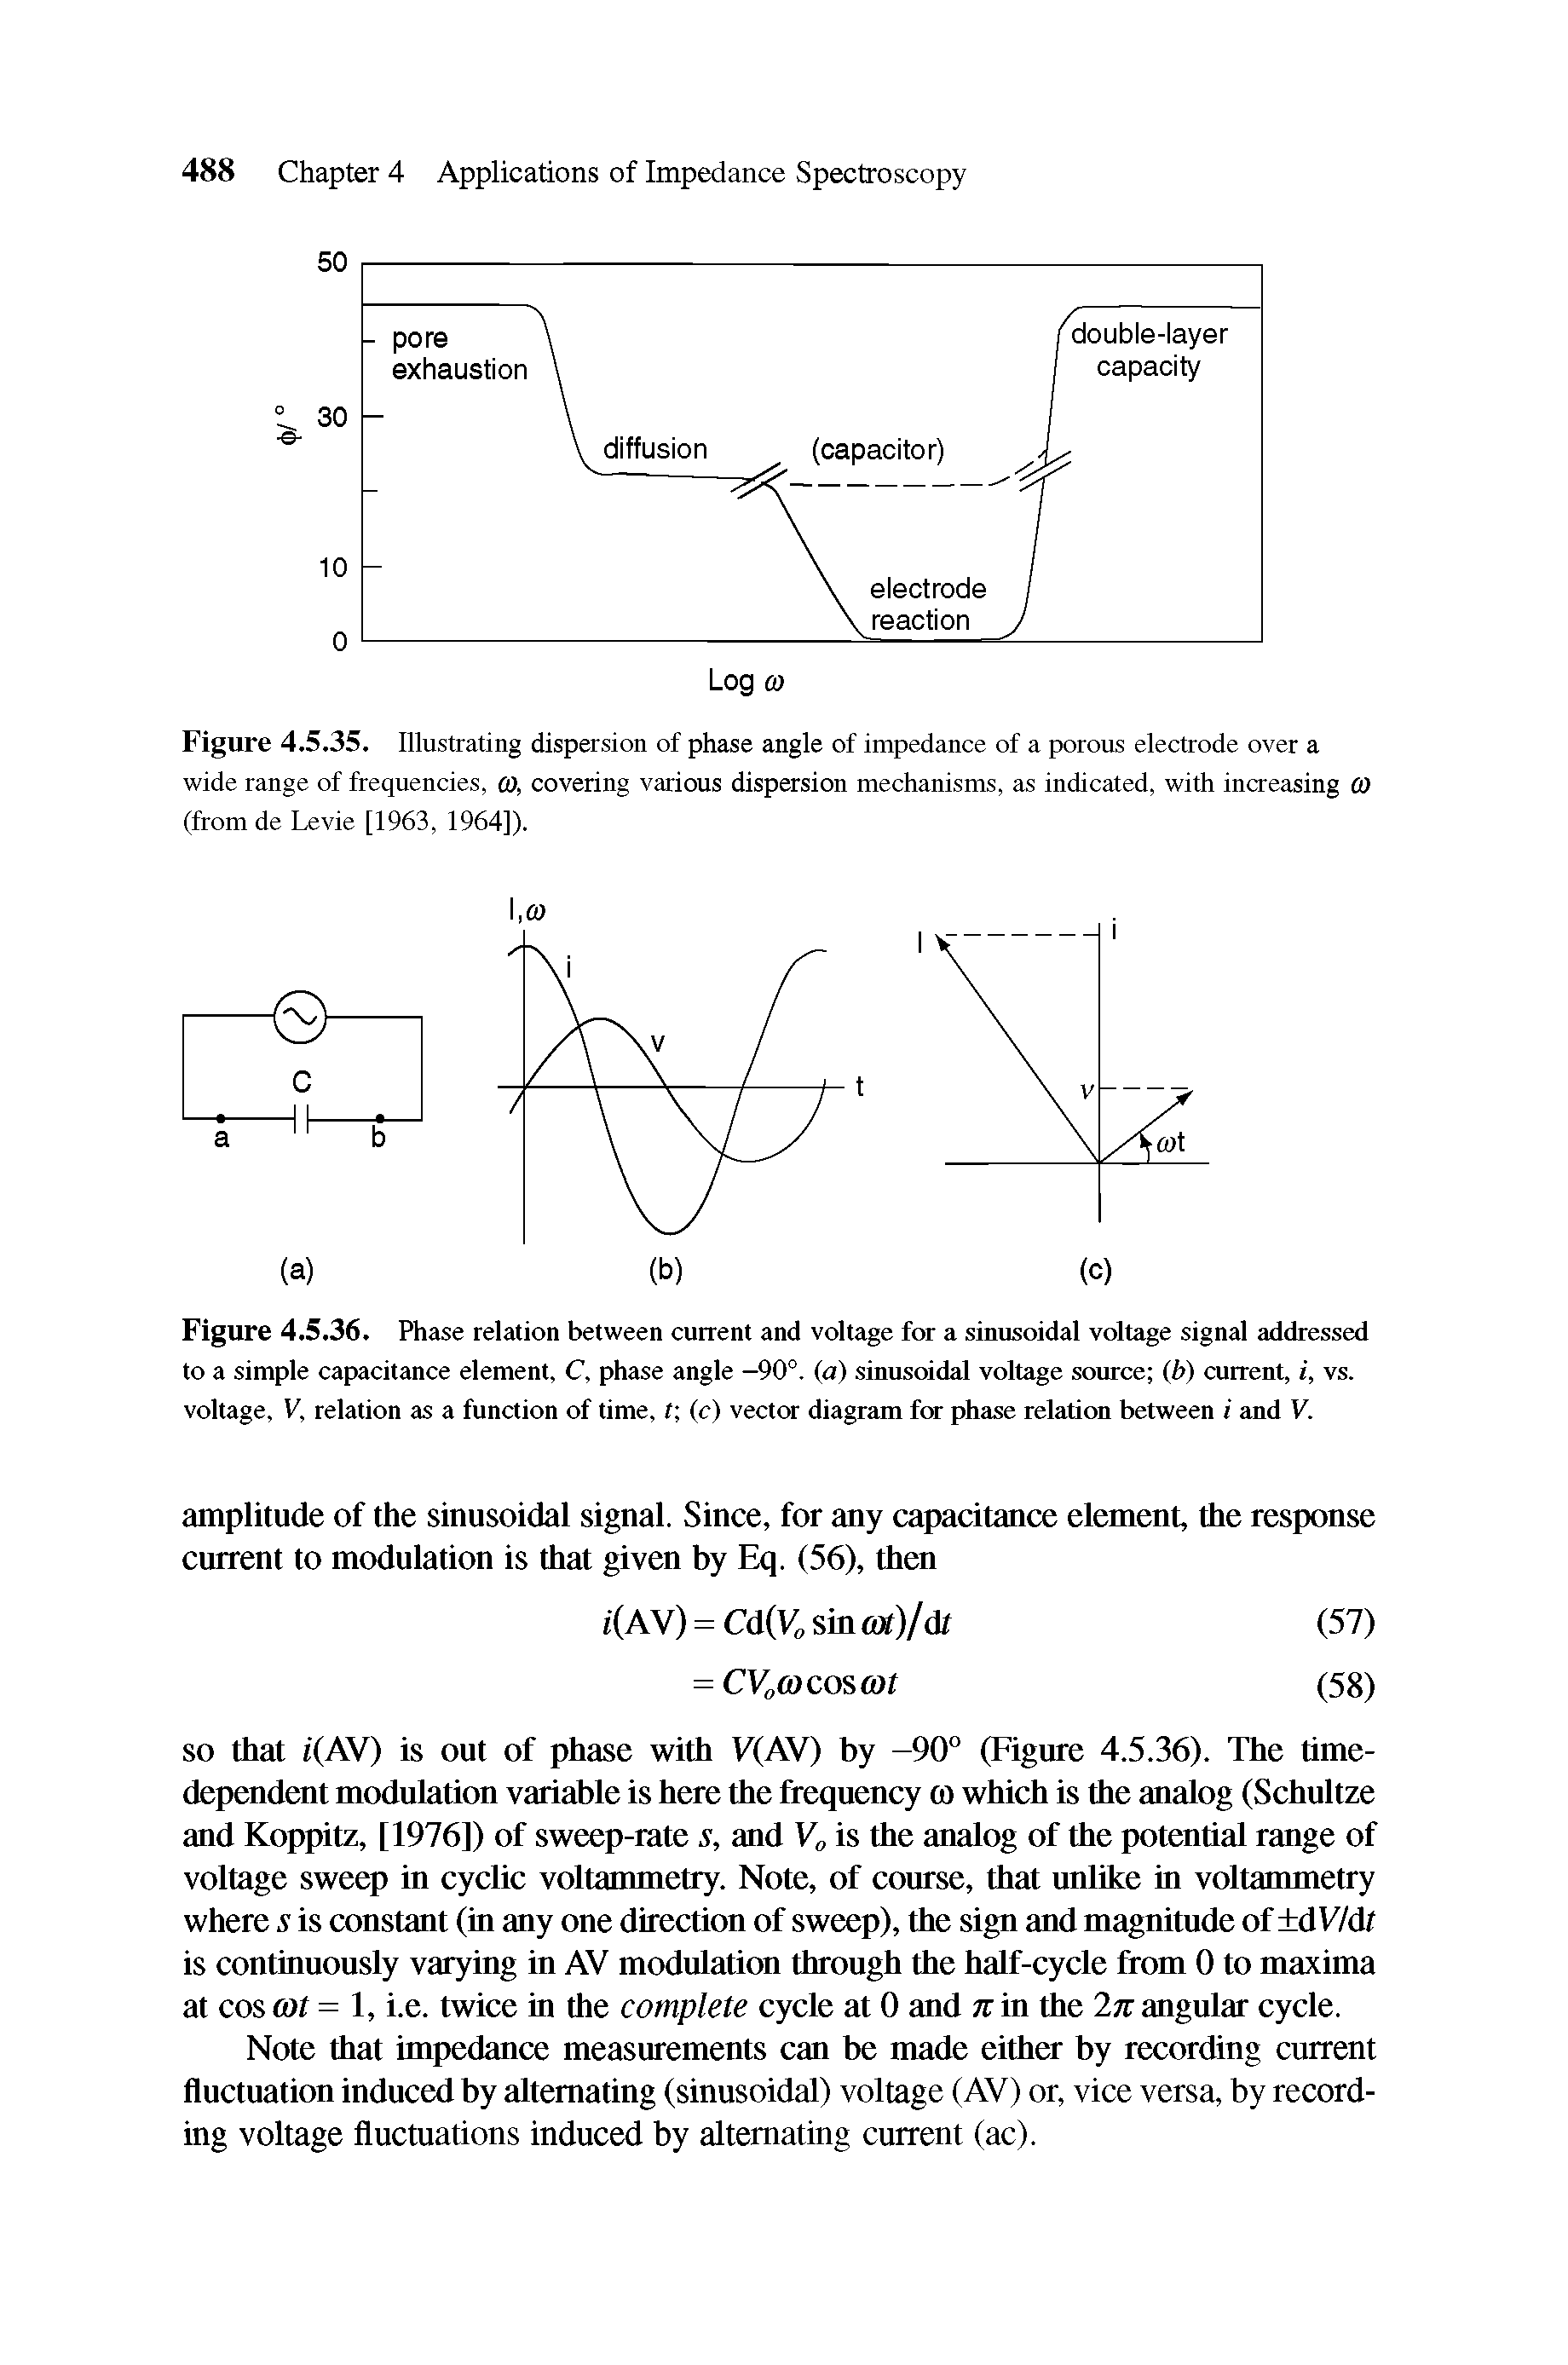 Figure 4.5.35. Illustrating dispersion of phase angle of impedance of a porous electrode over a wide range of frequencies, w, covering various dispersion mechanisms, as indicated, with increasing (0 (from de Levie [1963, 1964]).